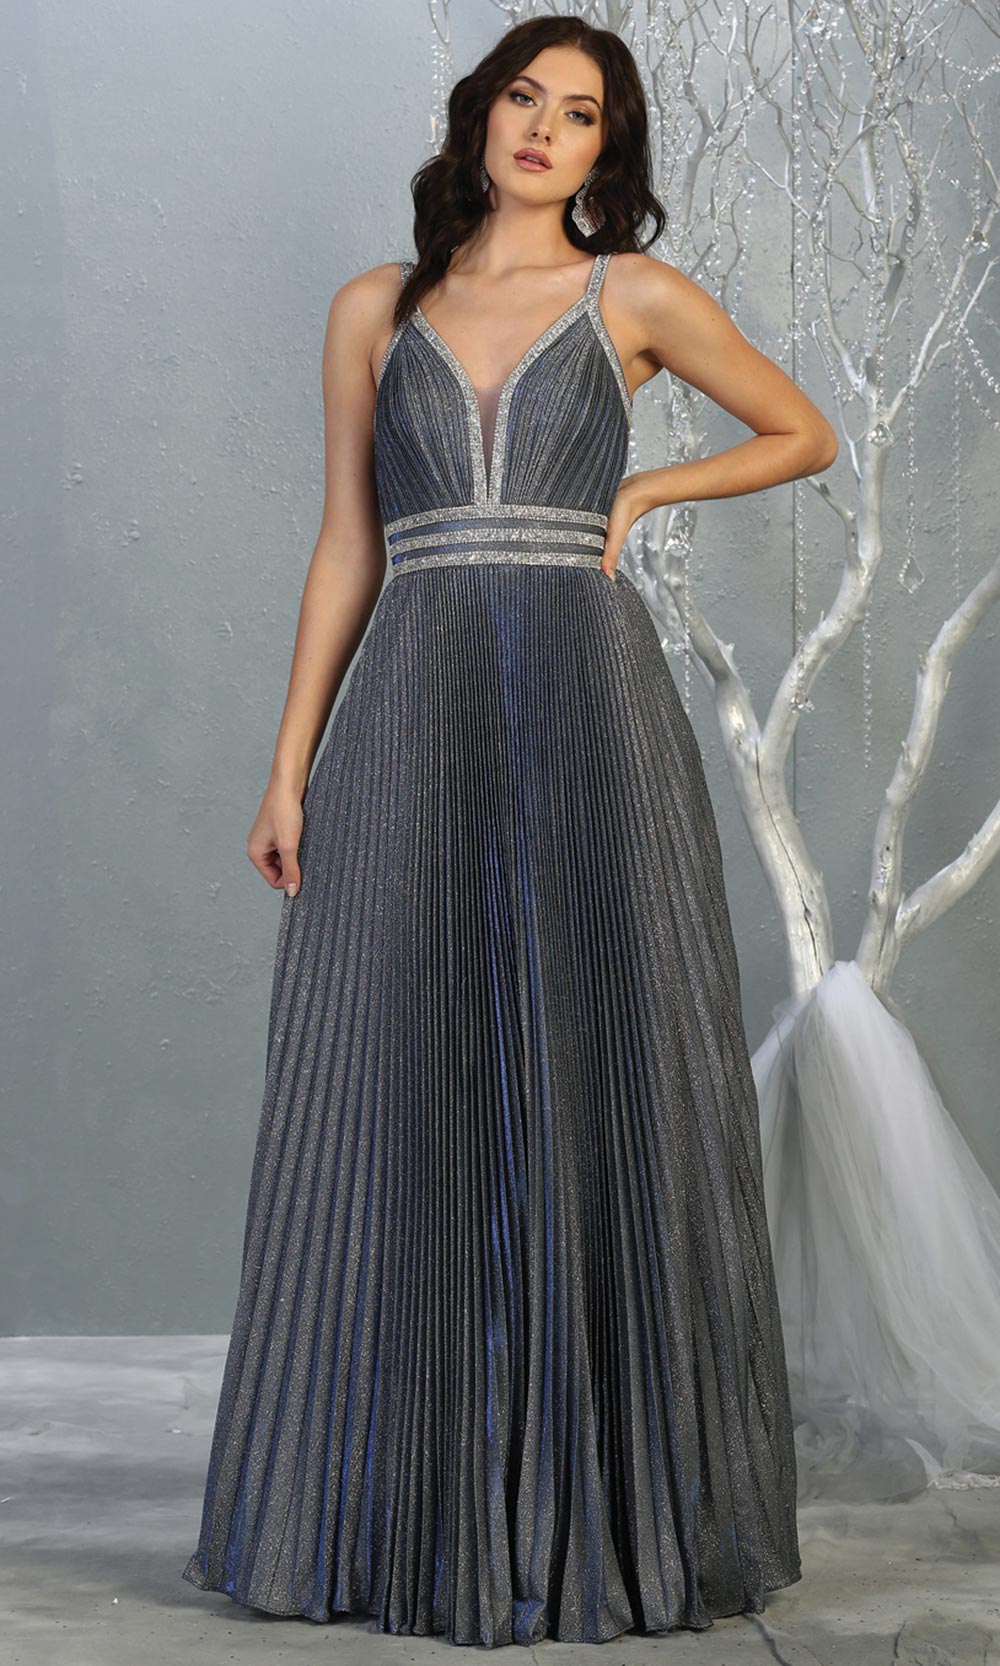 Mayqueen RQ7827 long v neck dusty blue evening dress w/straps & pleated skirt. Full length dark blue gown is perfect for  enagagement/e-shoot dress, formal wedding guest, evening party dress,prom, engagement, wedding reception. Plus sizes avail.jpg